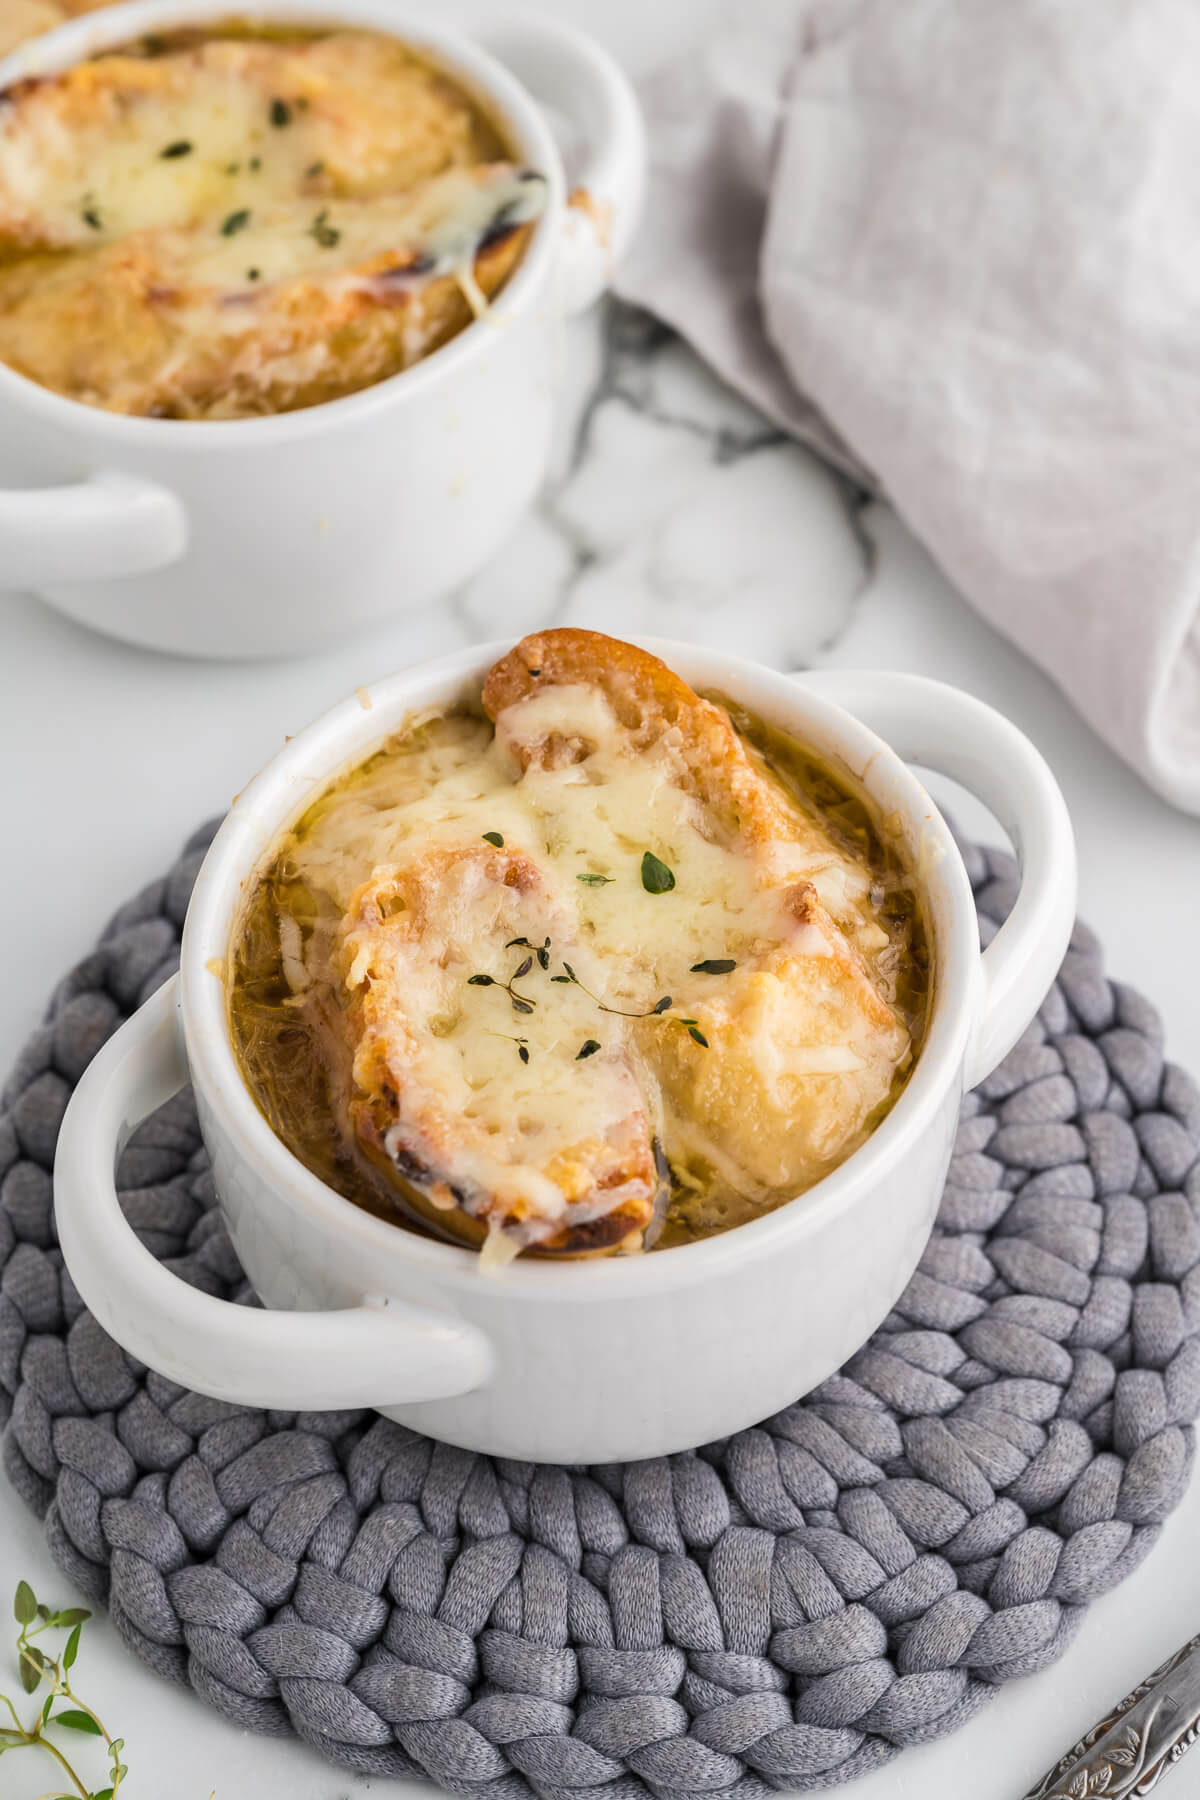 Gruyere cheese toast floating on top of French onion soup in a white bowl.